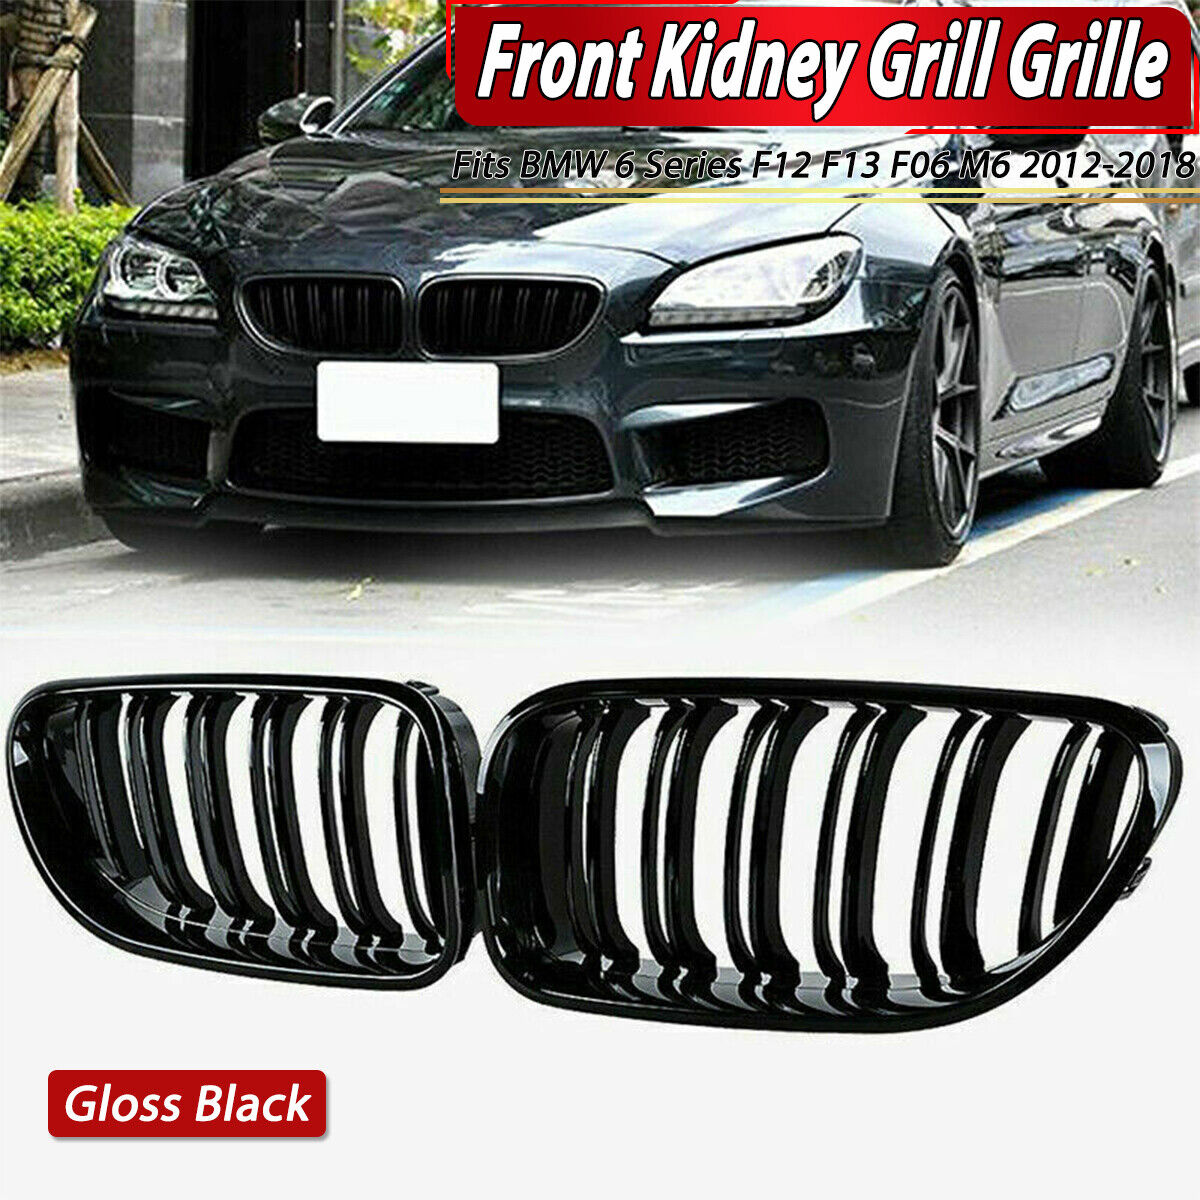 For BMW M6 F06 F12 F13 650i 640i 2012-2018 Front Kidney Grill Grille Gloss Black